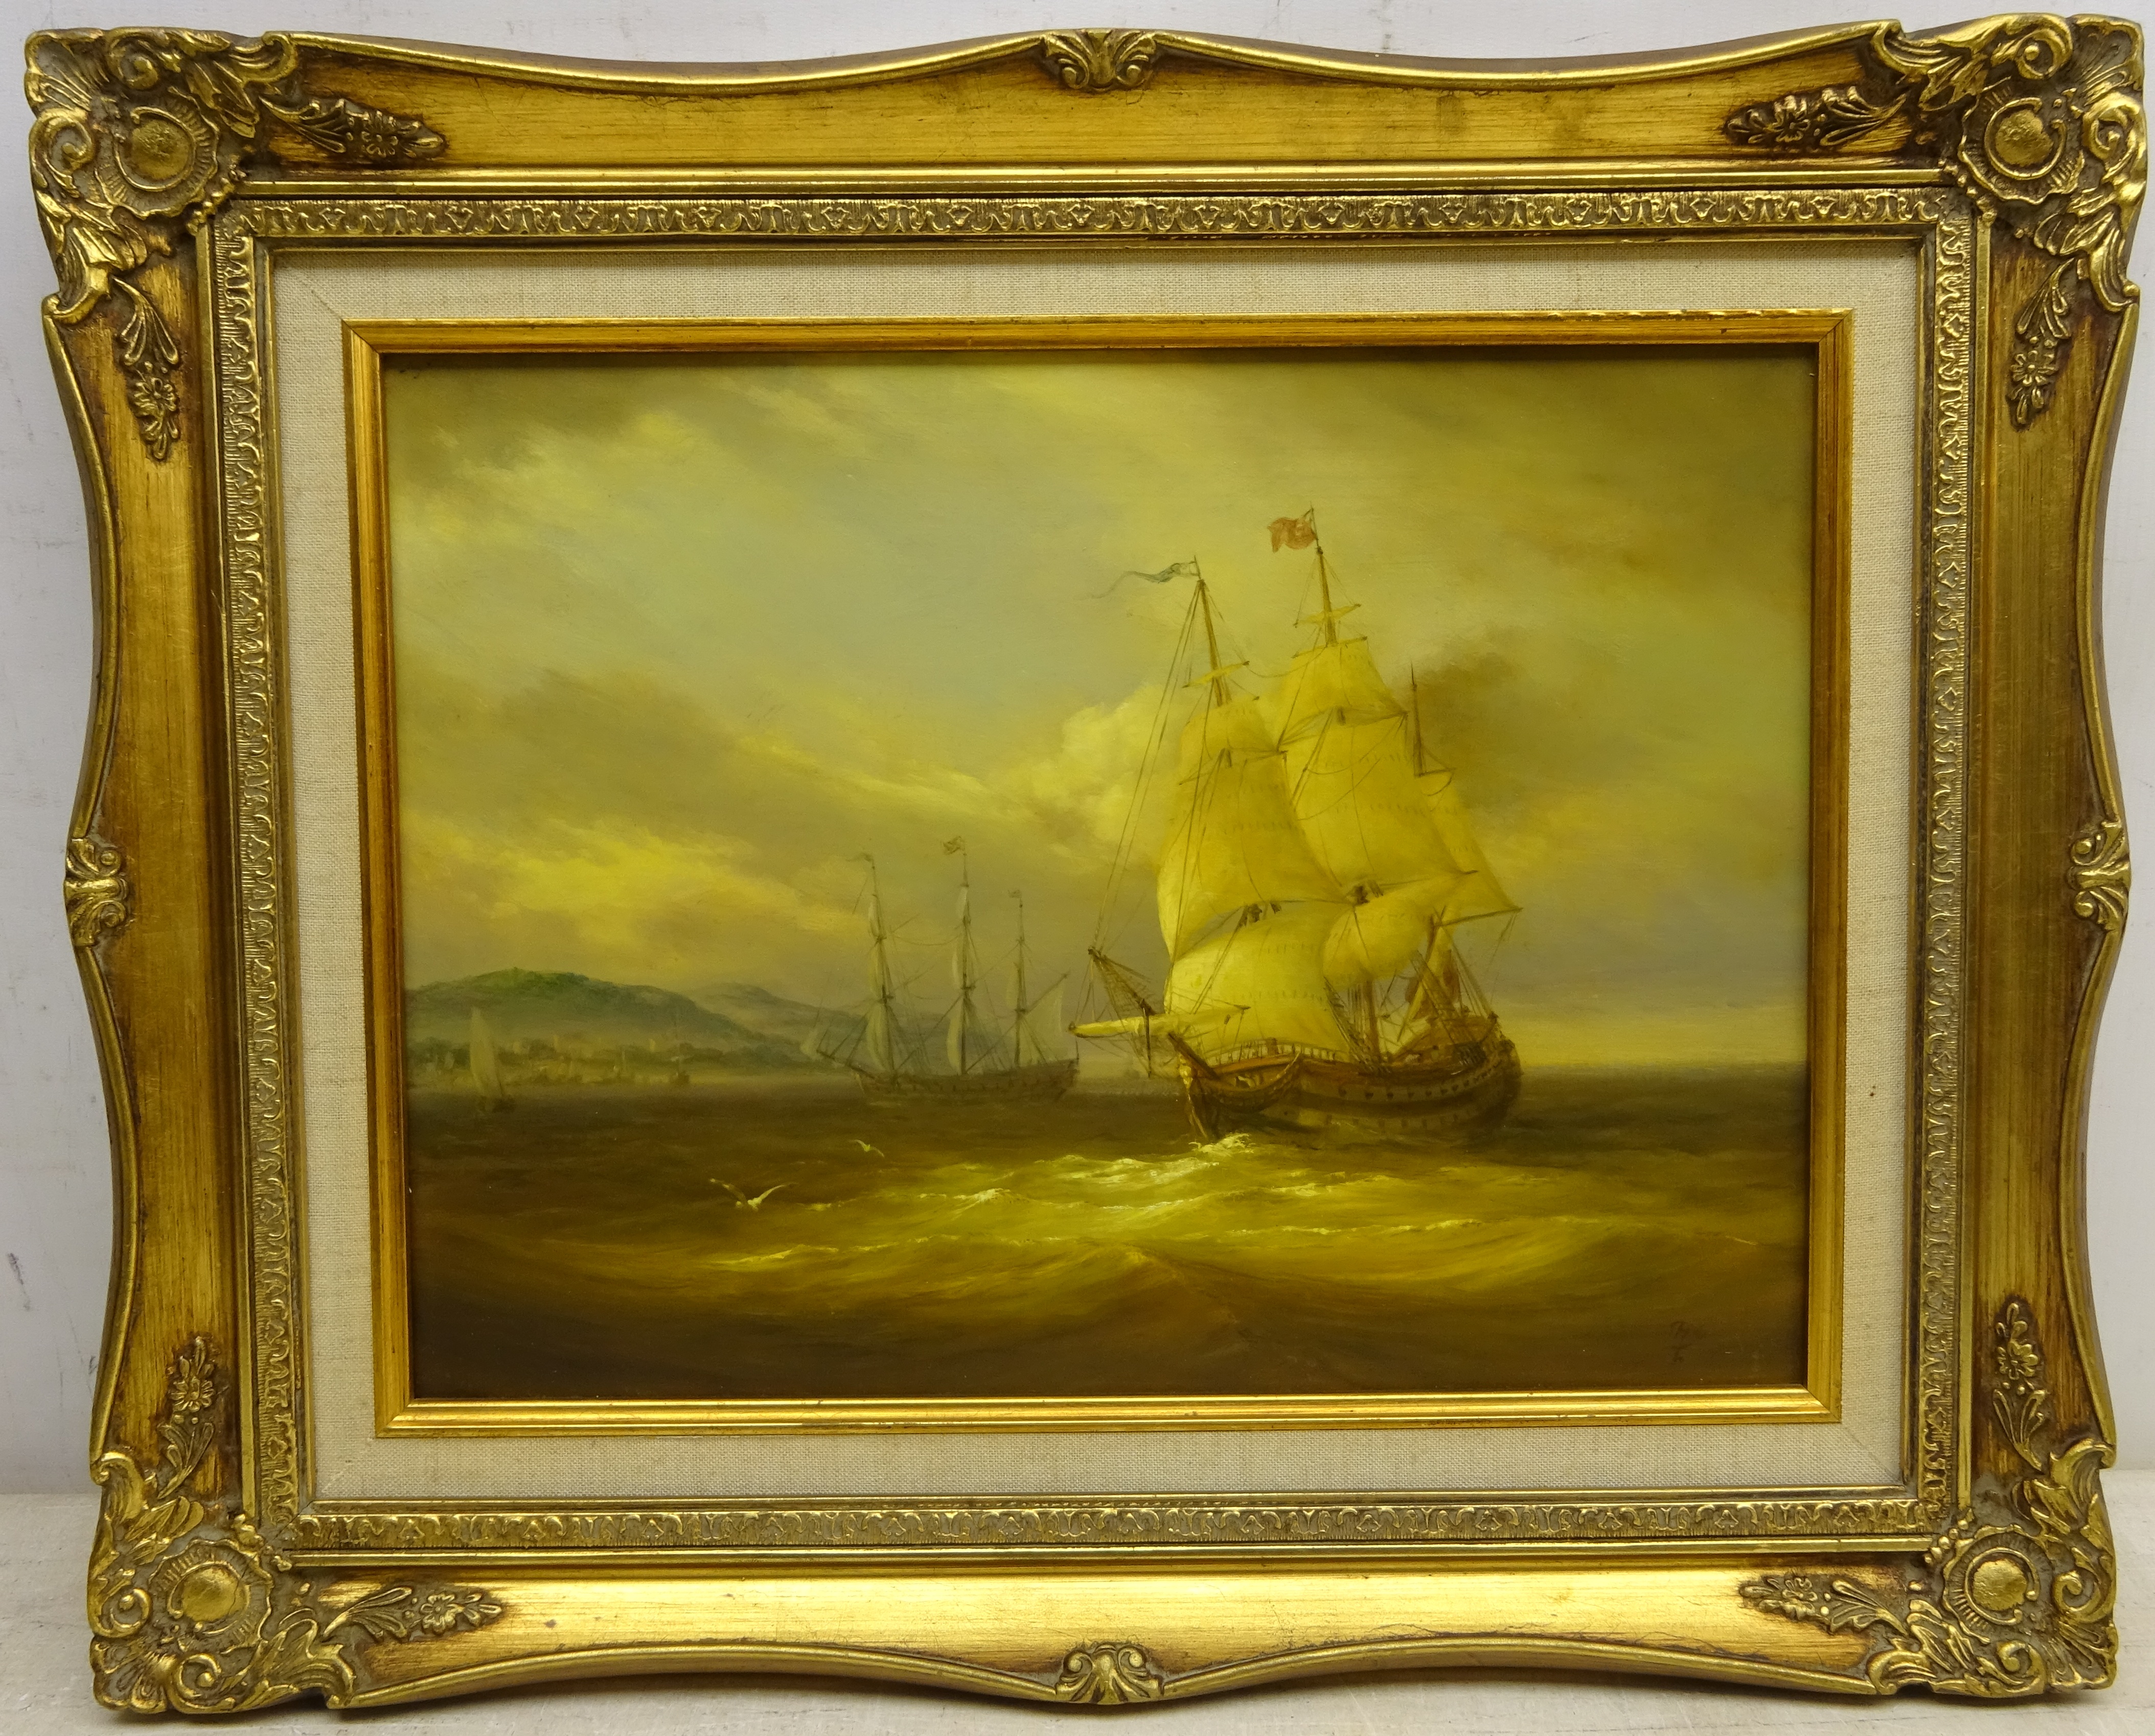 Masted Vessels out the Harbour at Dusk, 20th century oil on panel signed with initials, - Image 2 of 2